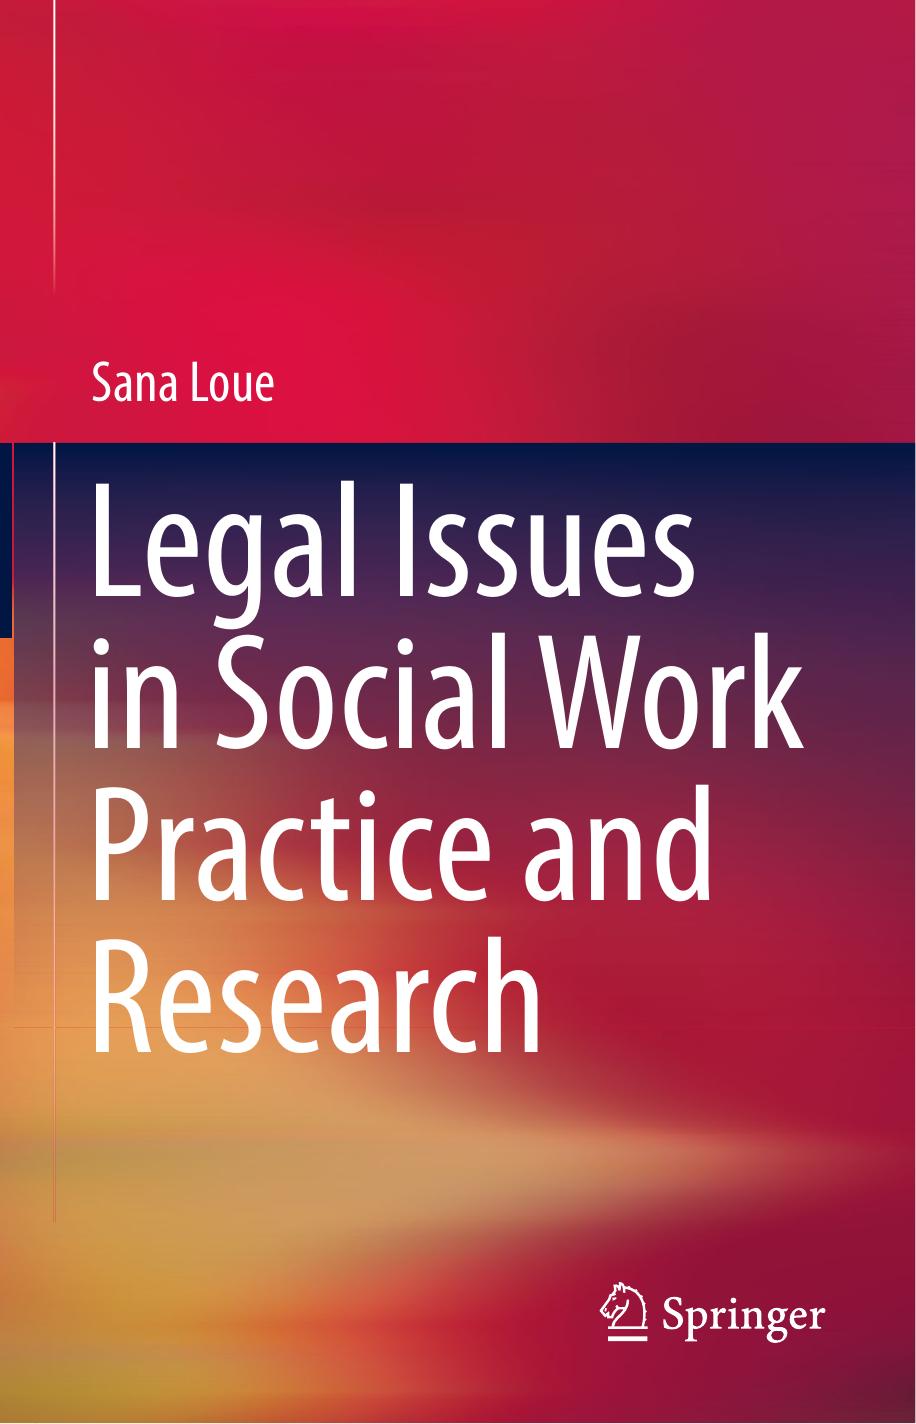 Legal Issues in Social Work Practice and Research 2018